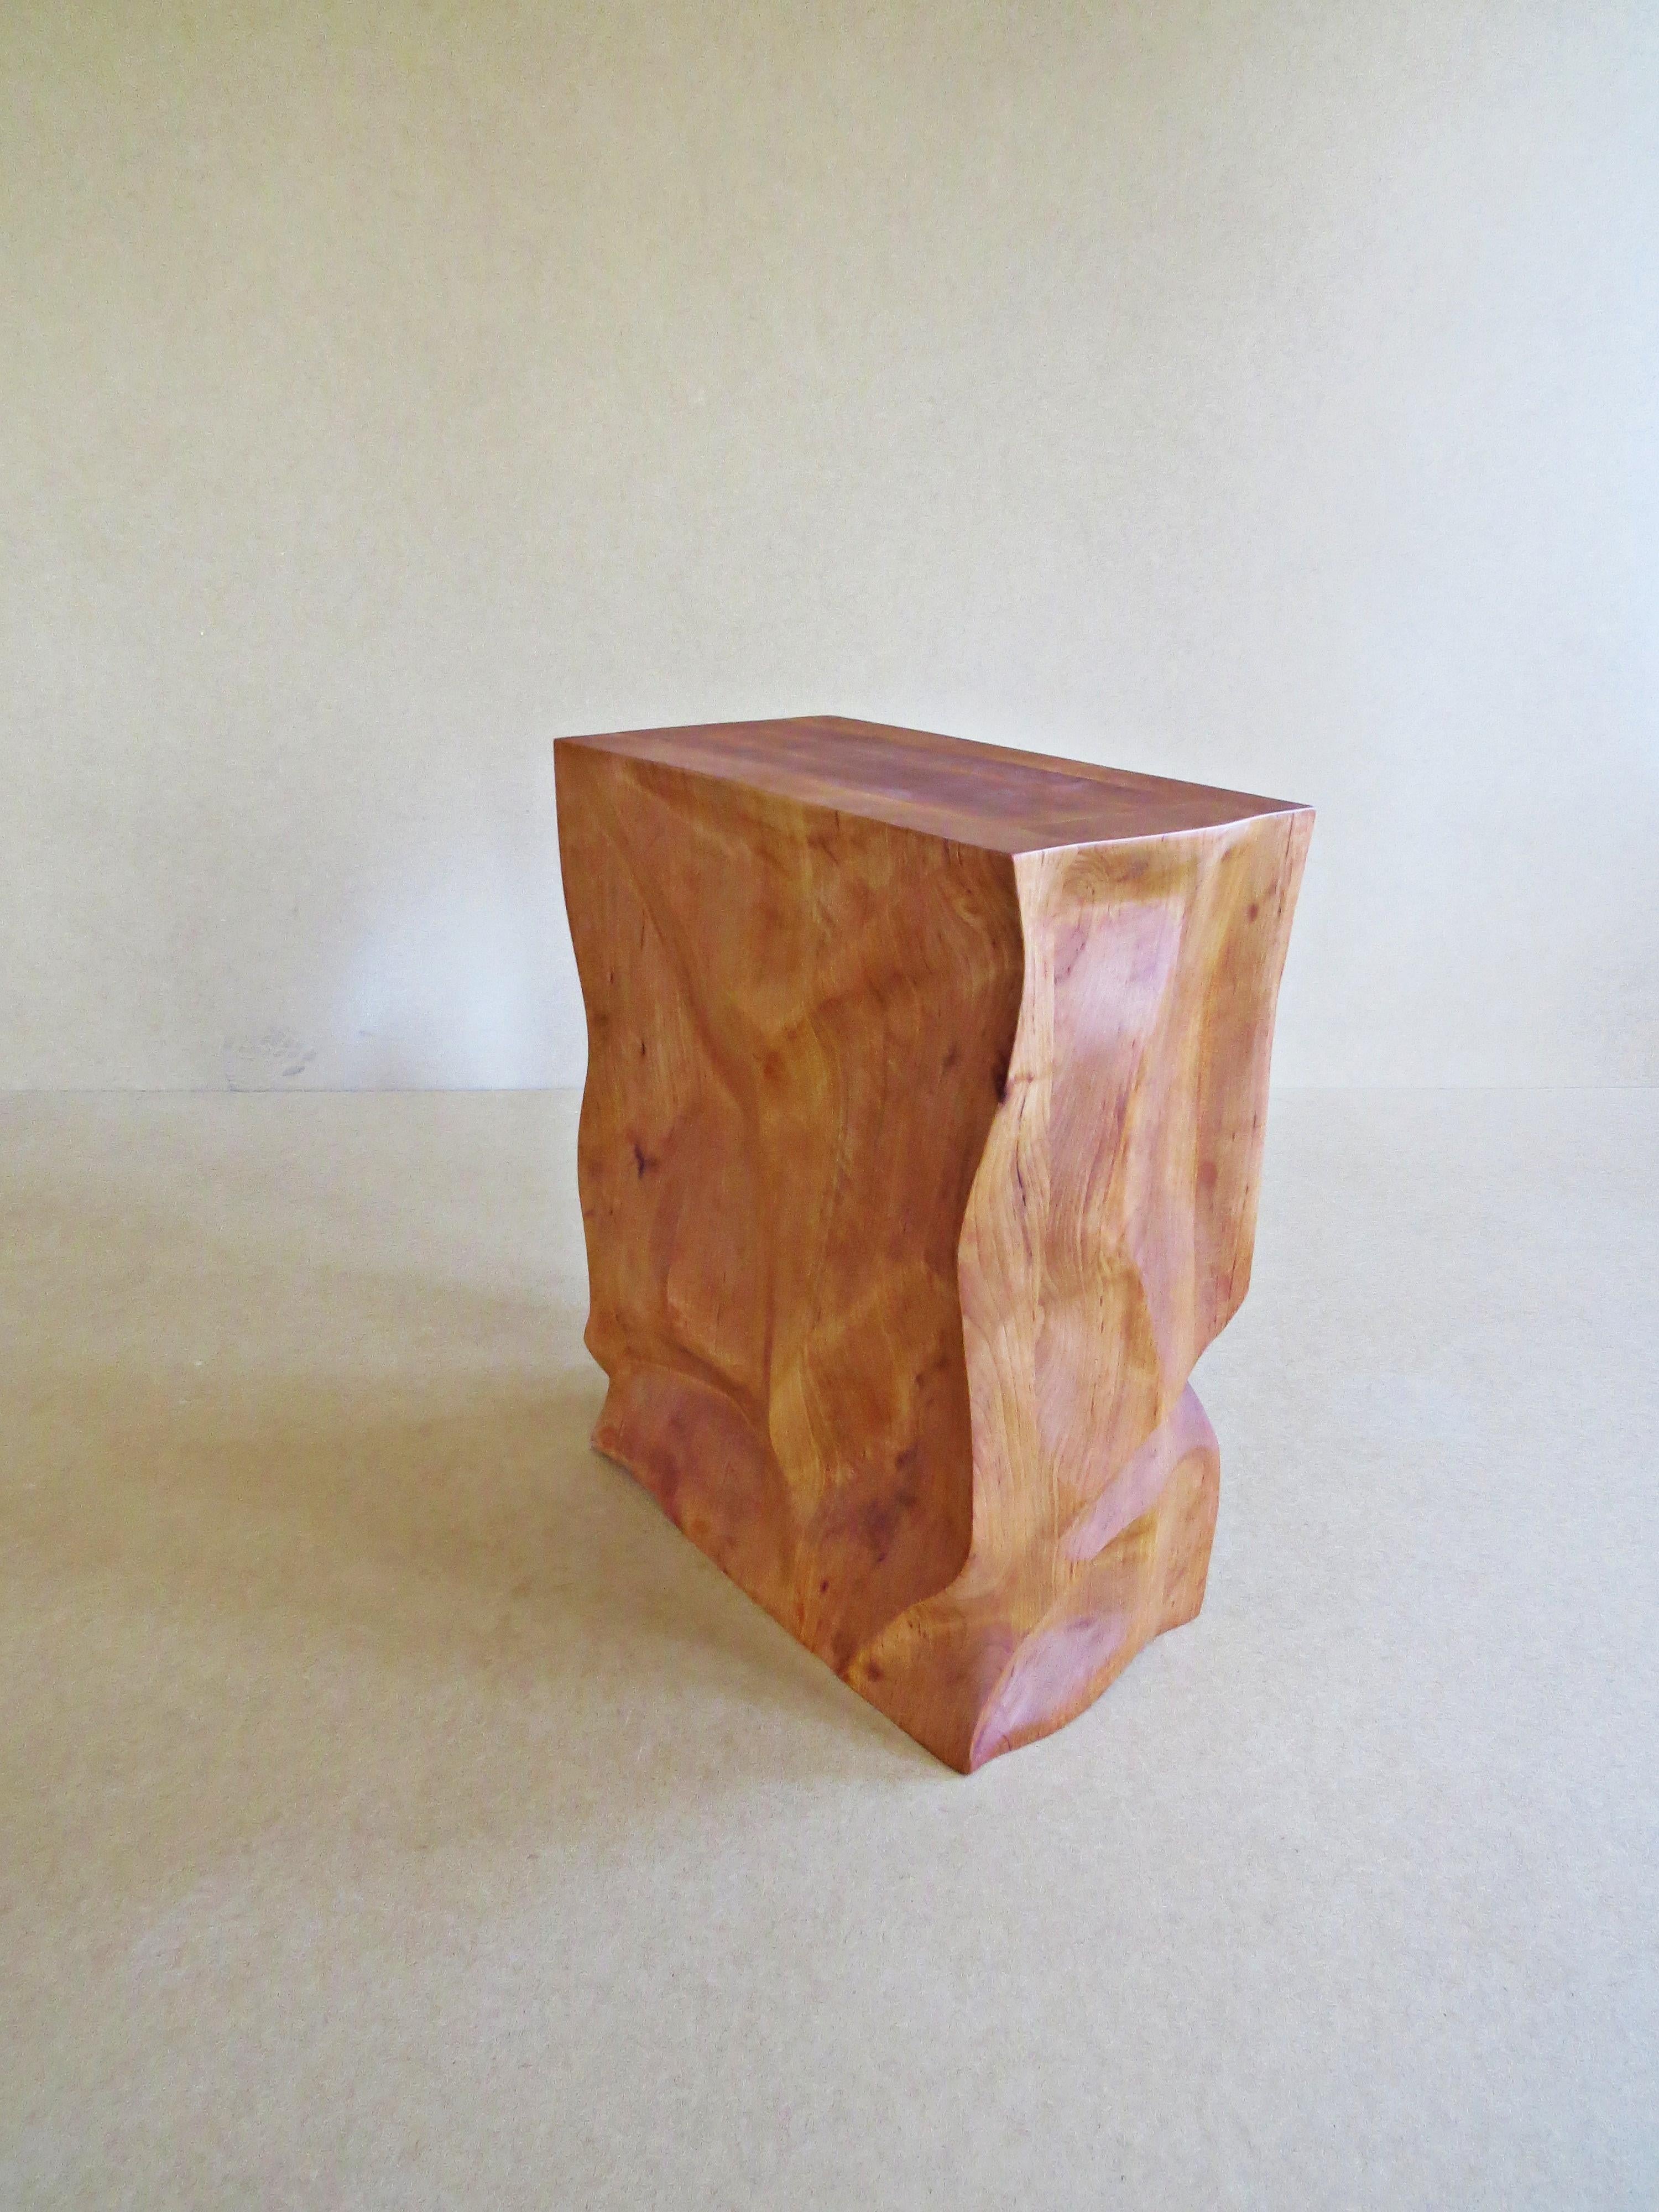 Hand-Crafted Modern, European, 21st Century, Side Table, Stool, Solid Wood, Sculptural